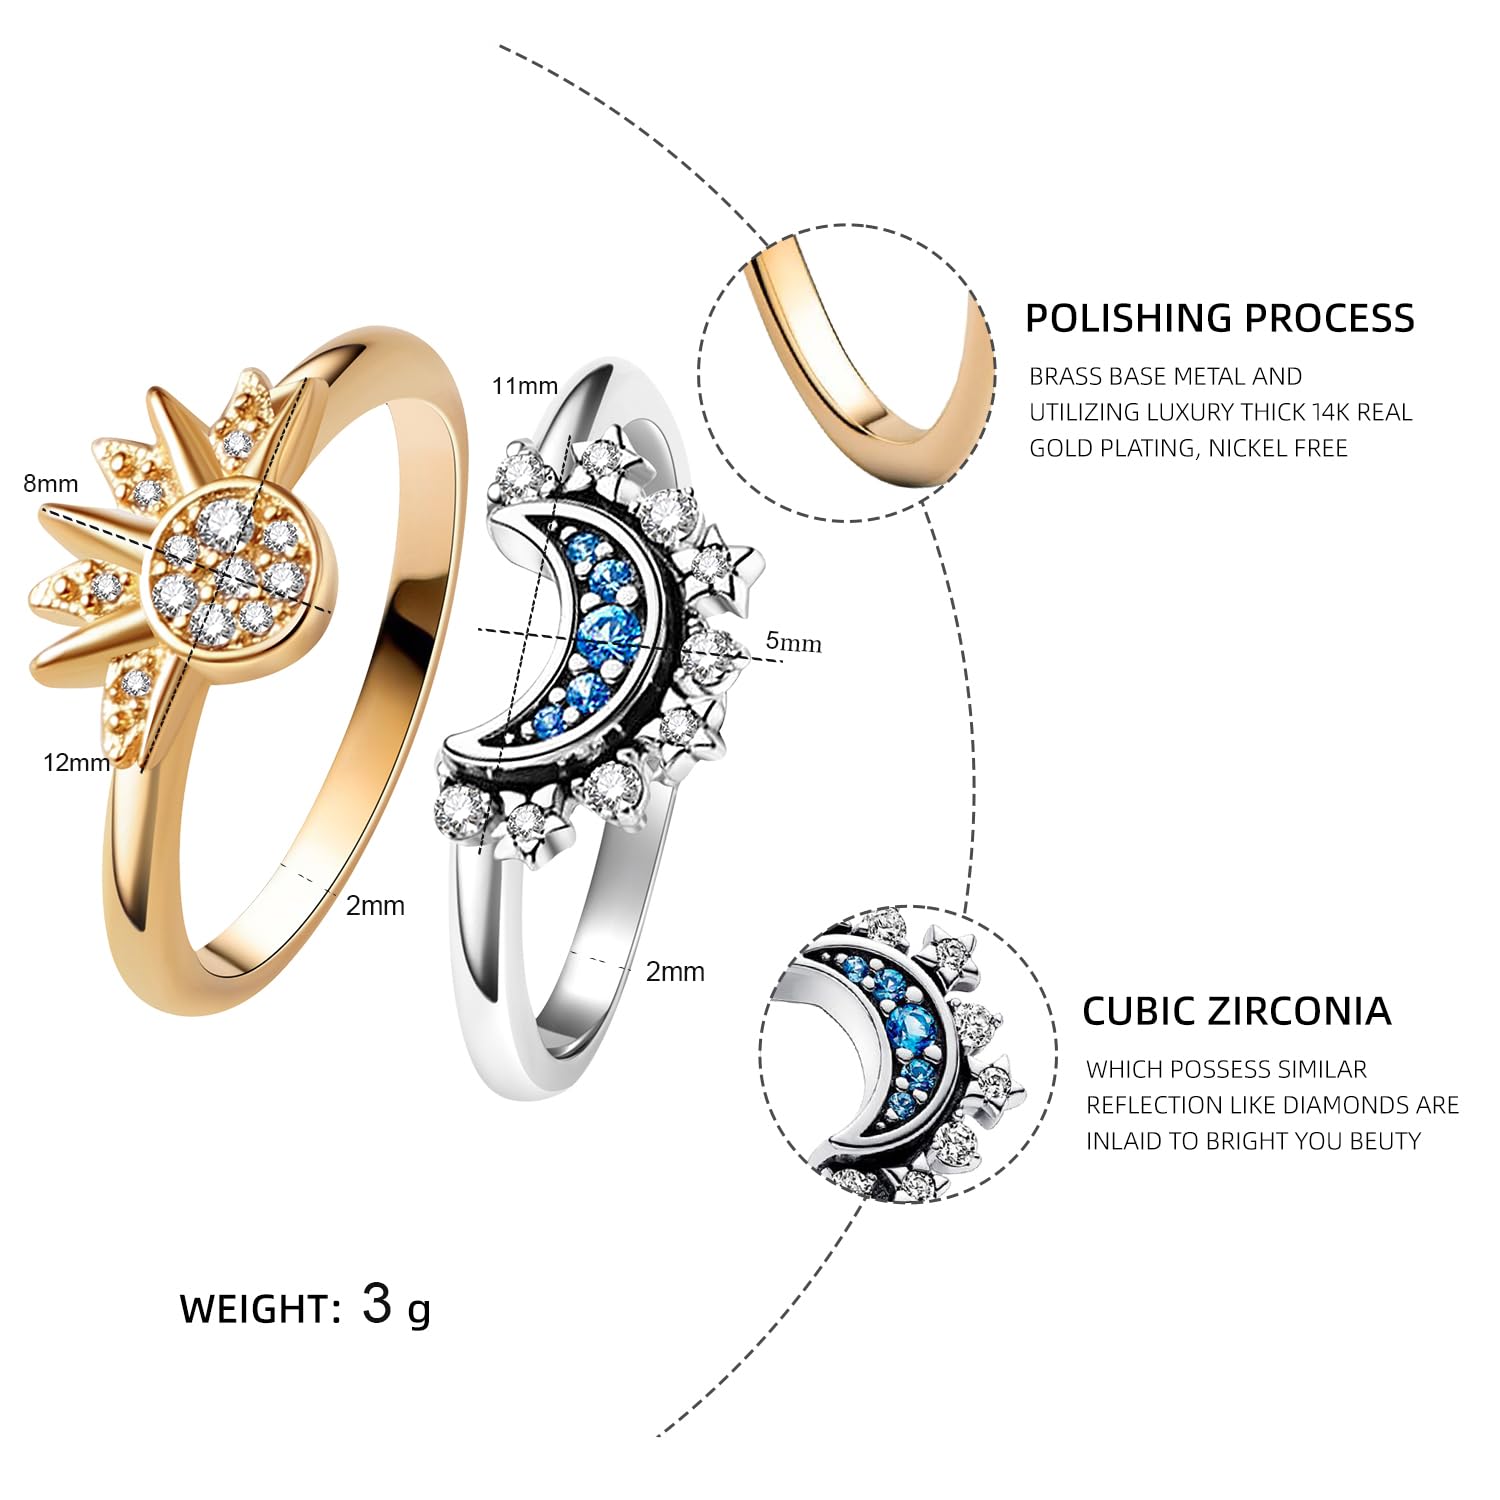 UNE DOUCE Celestial Sun and Moon Ring Set, Sparkling Sun Ring/Blue Moon Ring with 14k Gold/Silver Plating, Friendship Promise Ring, Stackable Celestial Rings, Gift for Women Girls